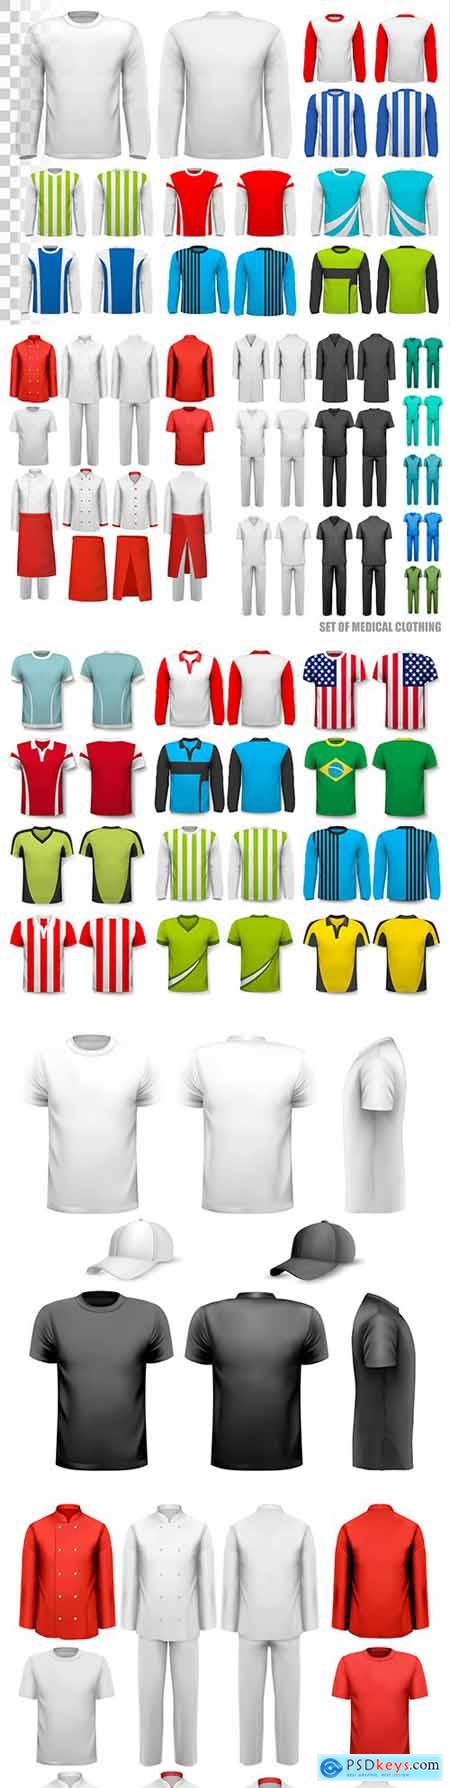 Mens shirts with sleeve and uniform kit design template